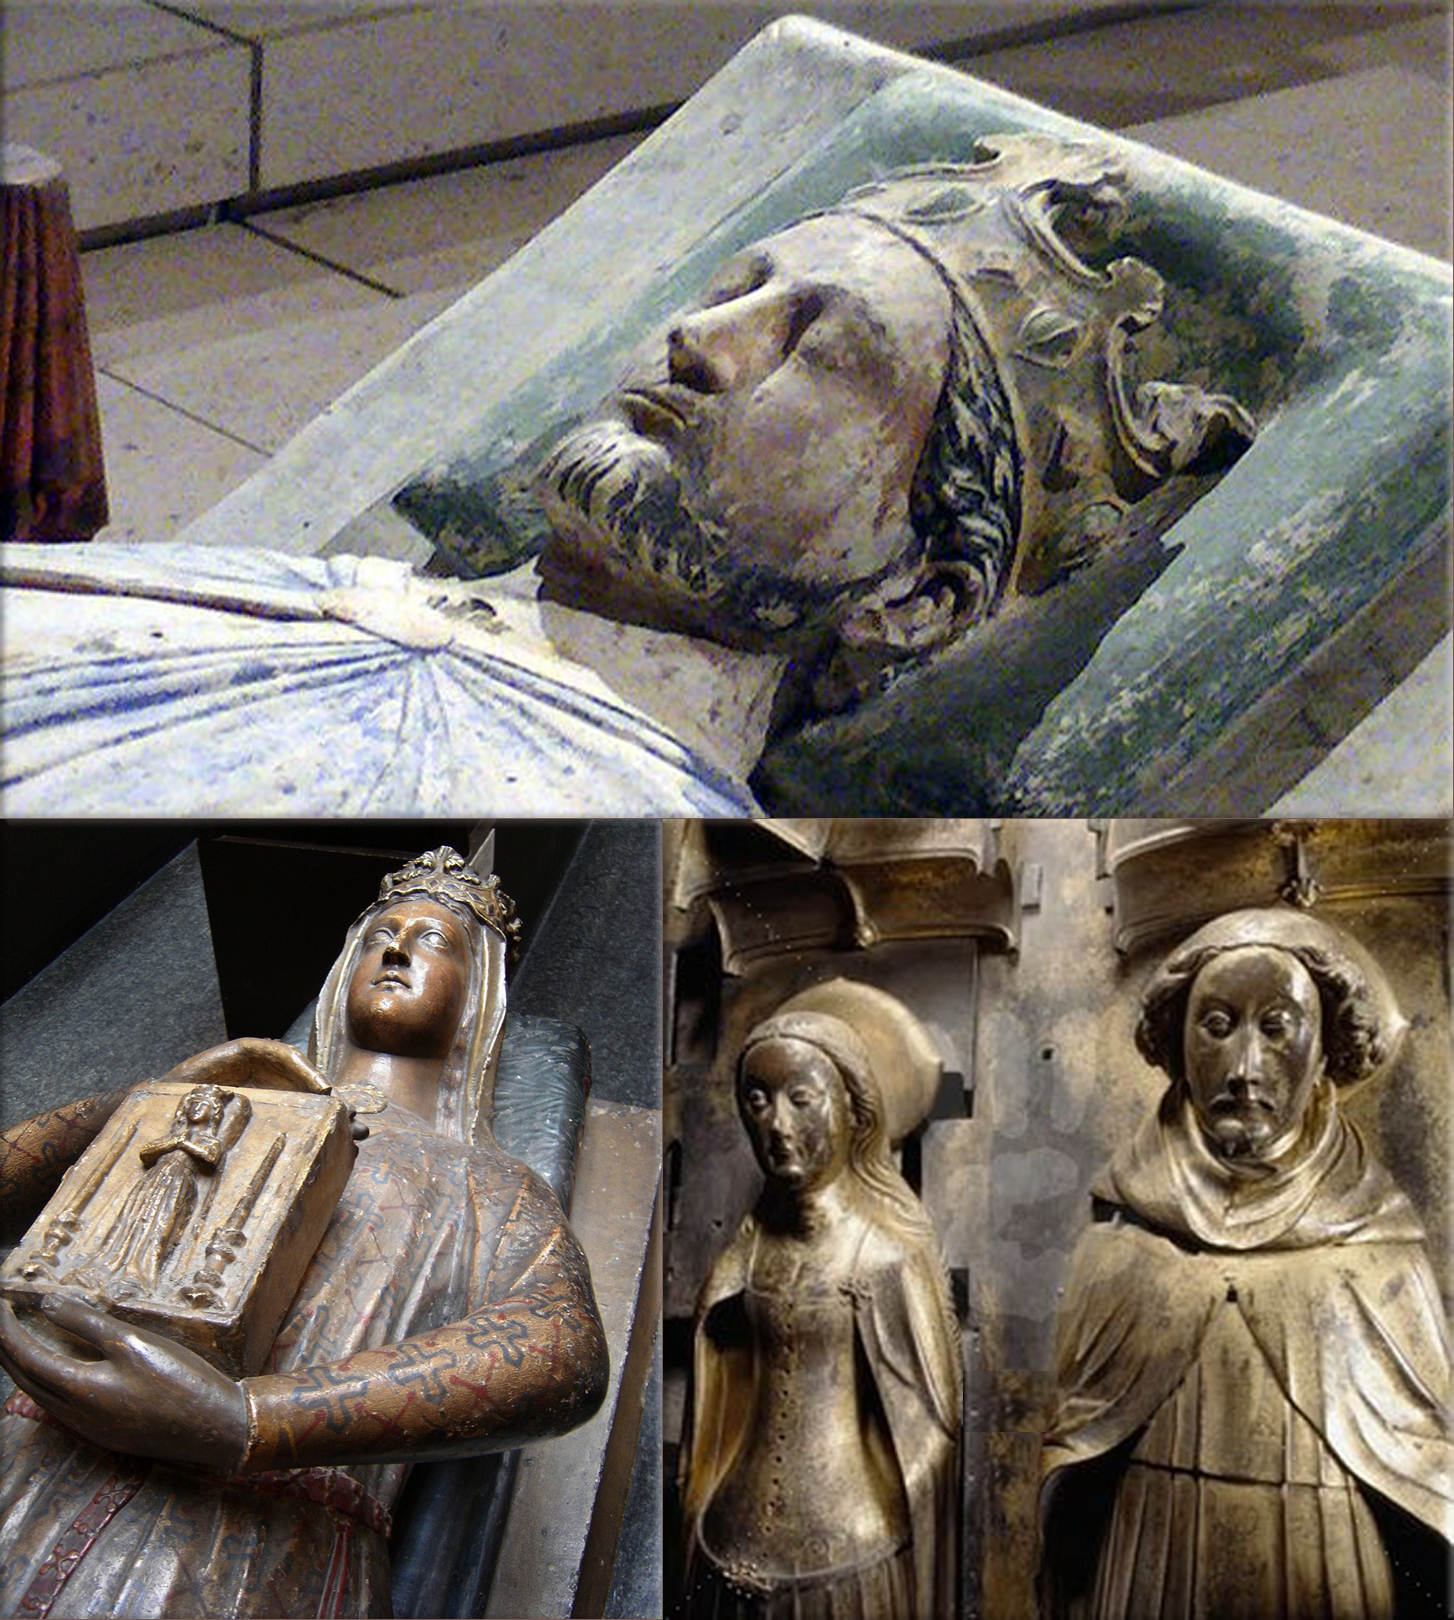 Richard I of England marries Berengaria of Navarre who is crowned Queen consort of England on May 12th, 1191